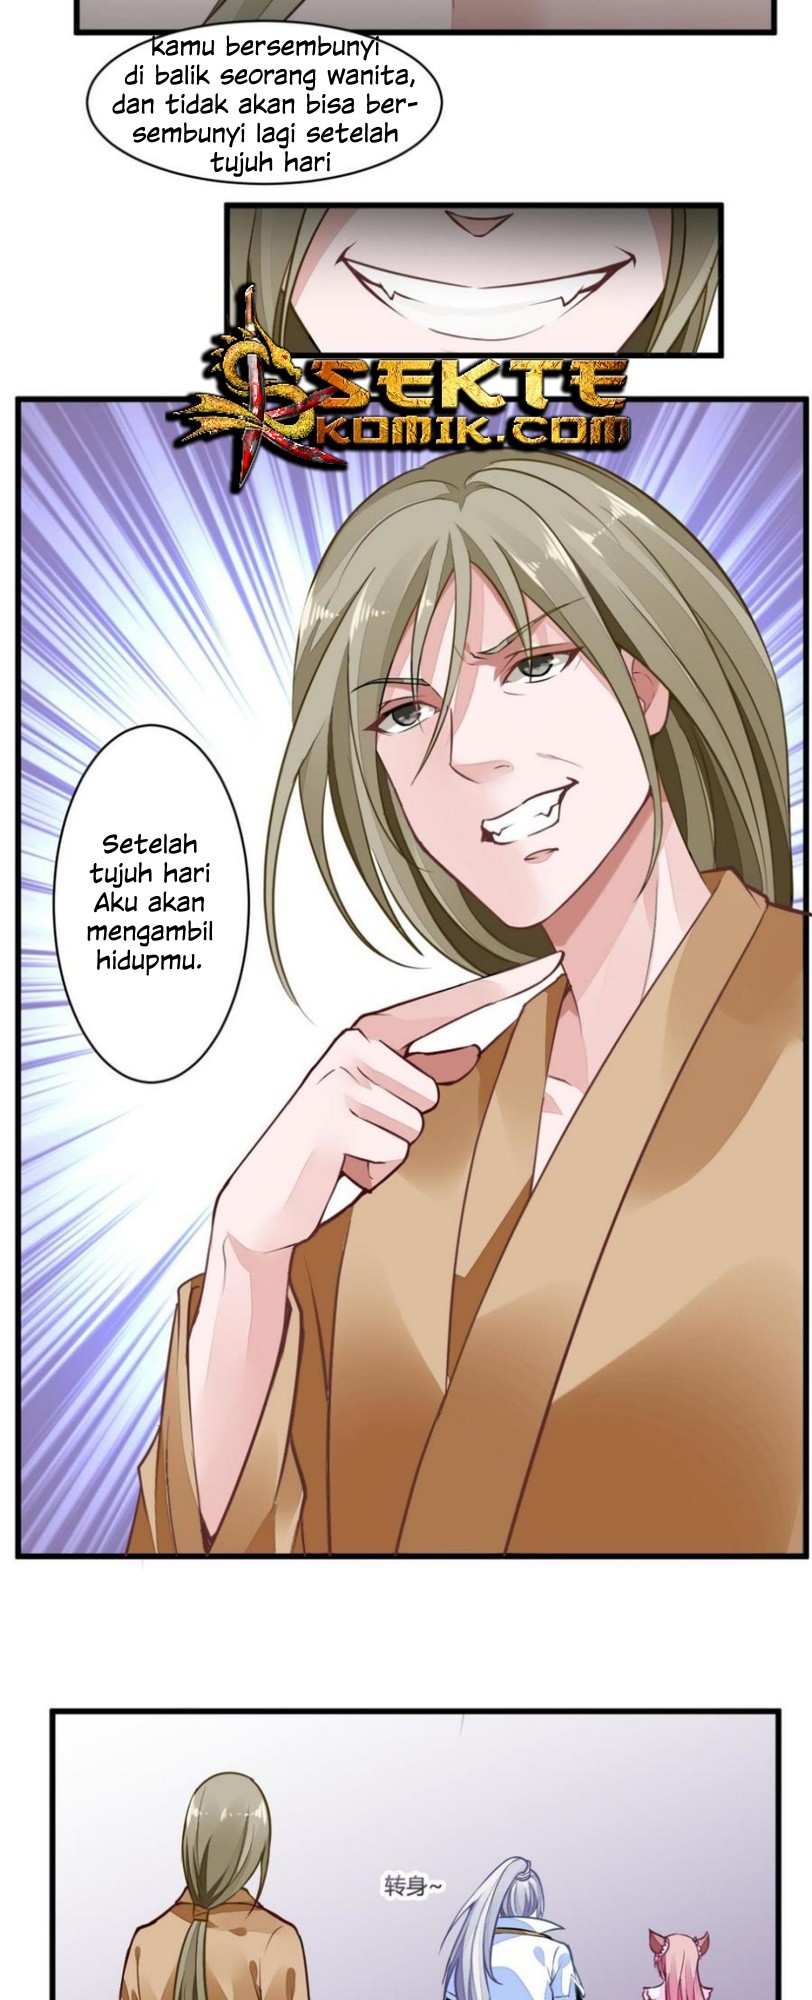 King of the Gods Chapter 40